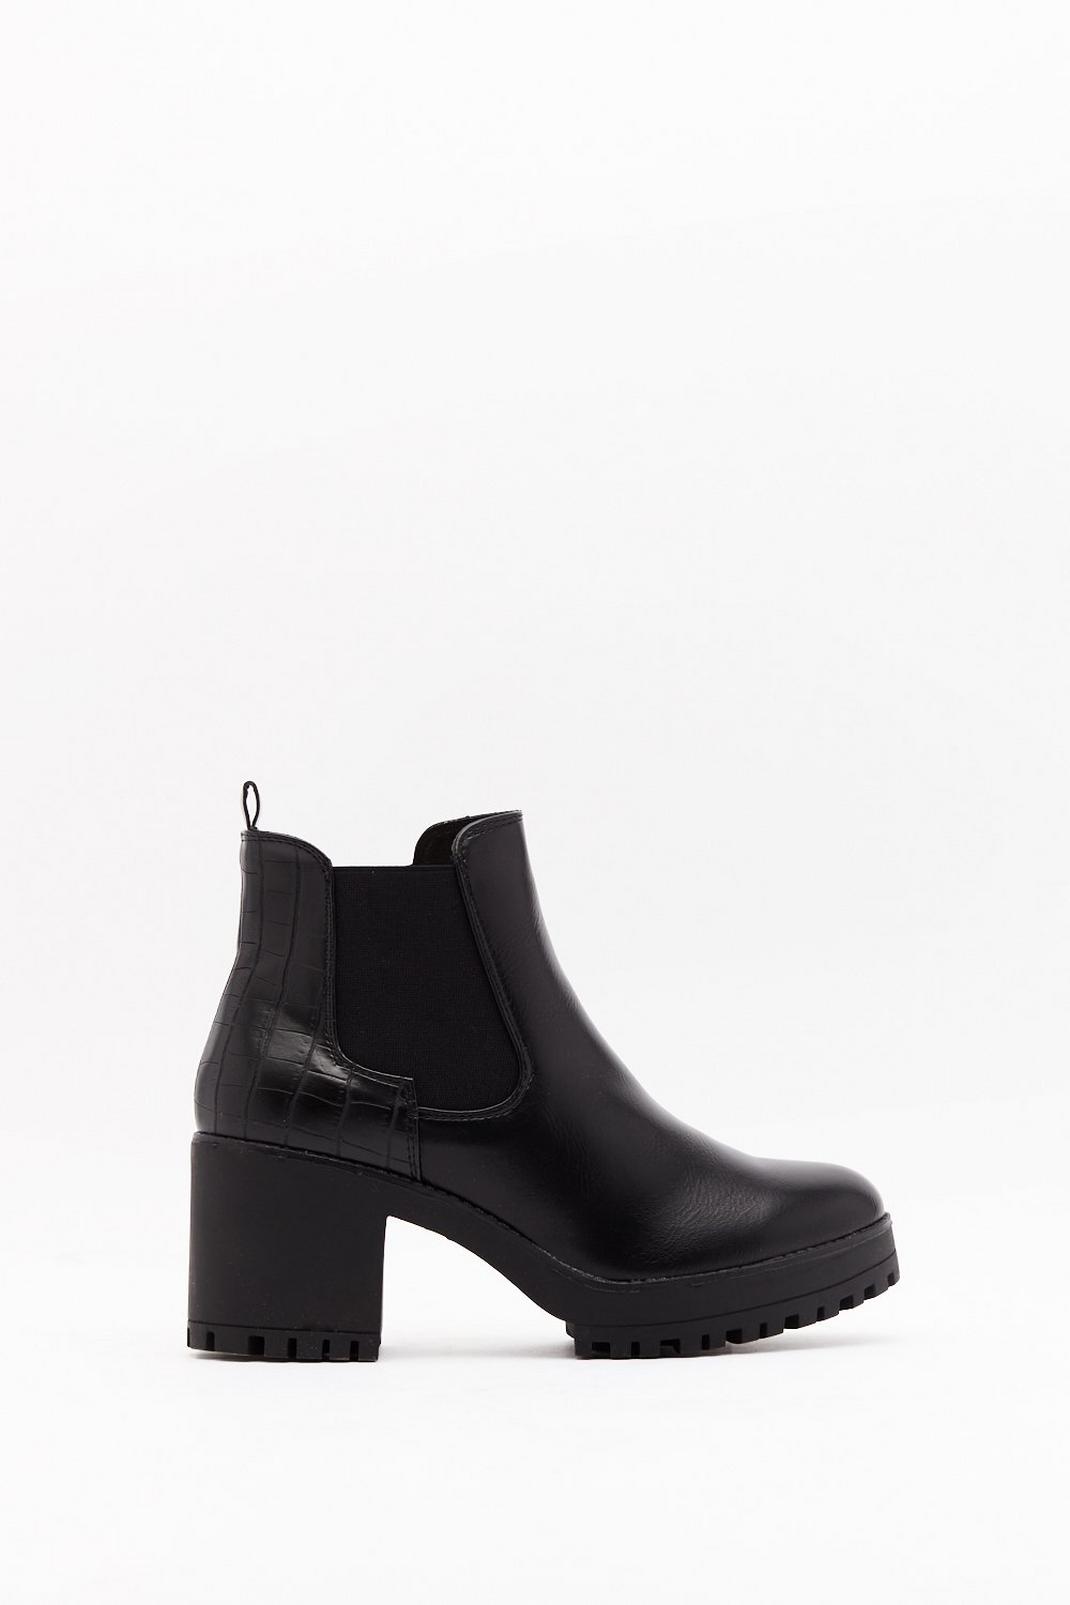 105 Croc Faux Leather Heeled Chelsea Boots image number 1